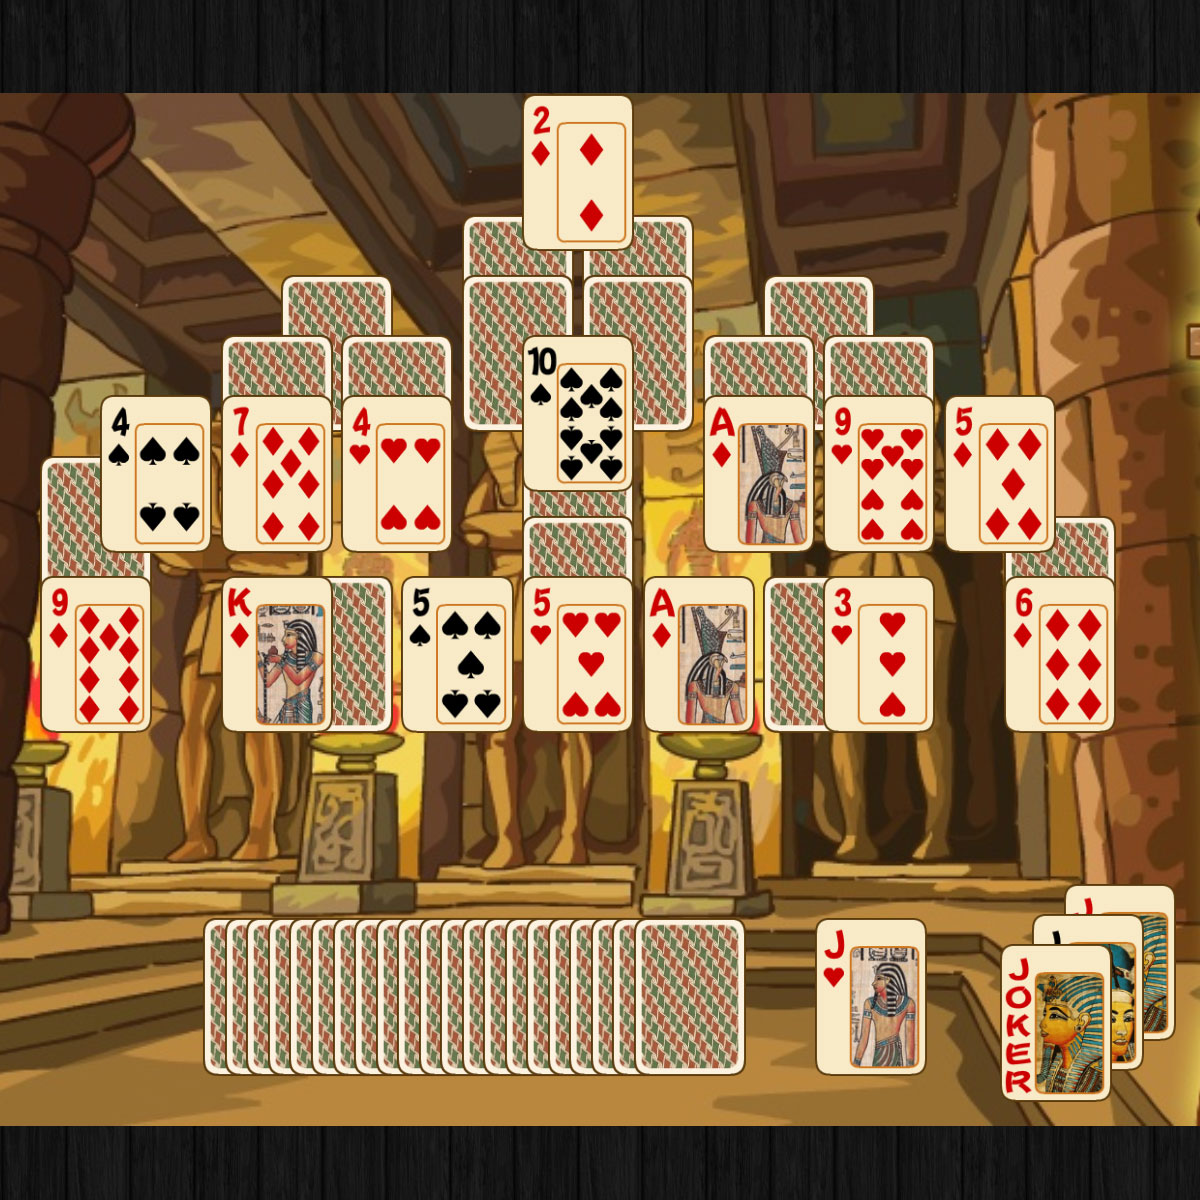 Pyramid solitaire ancient egypt game